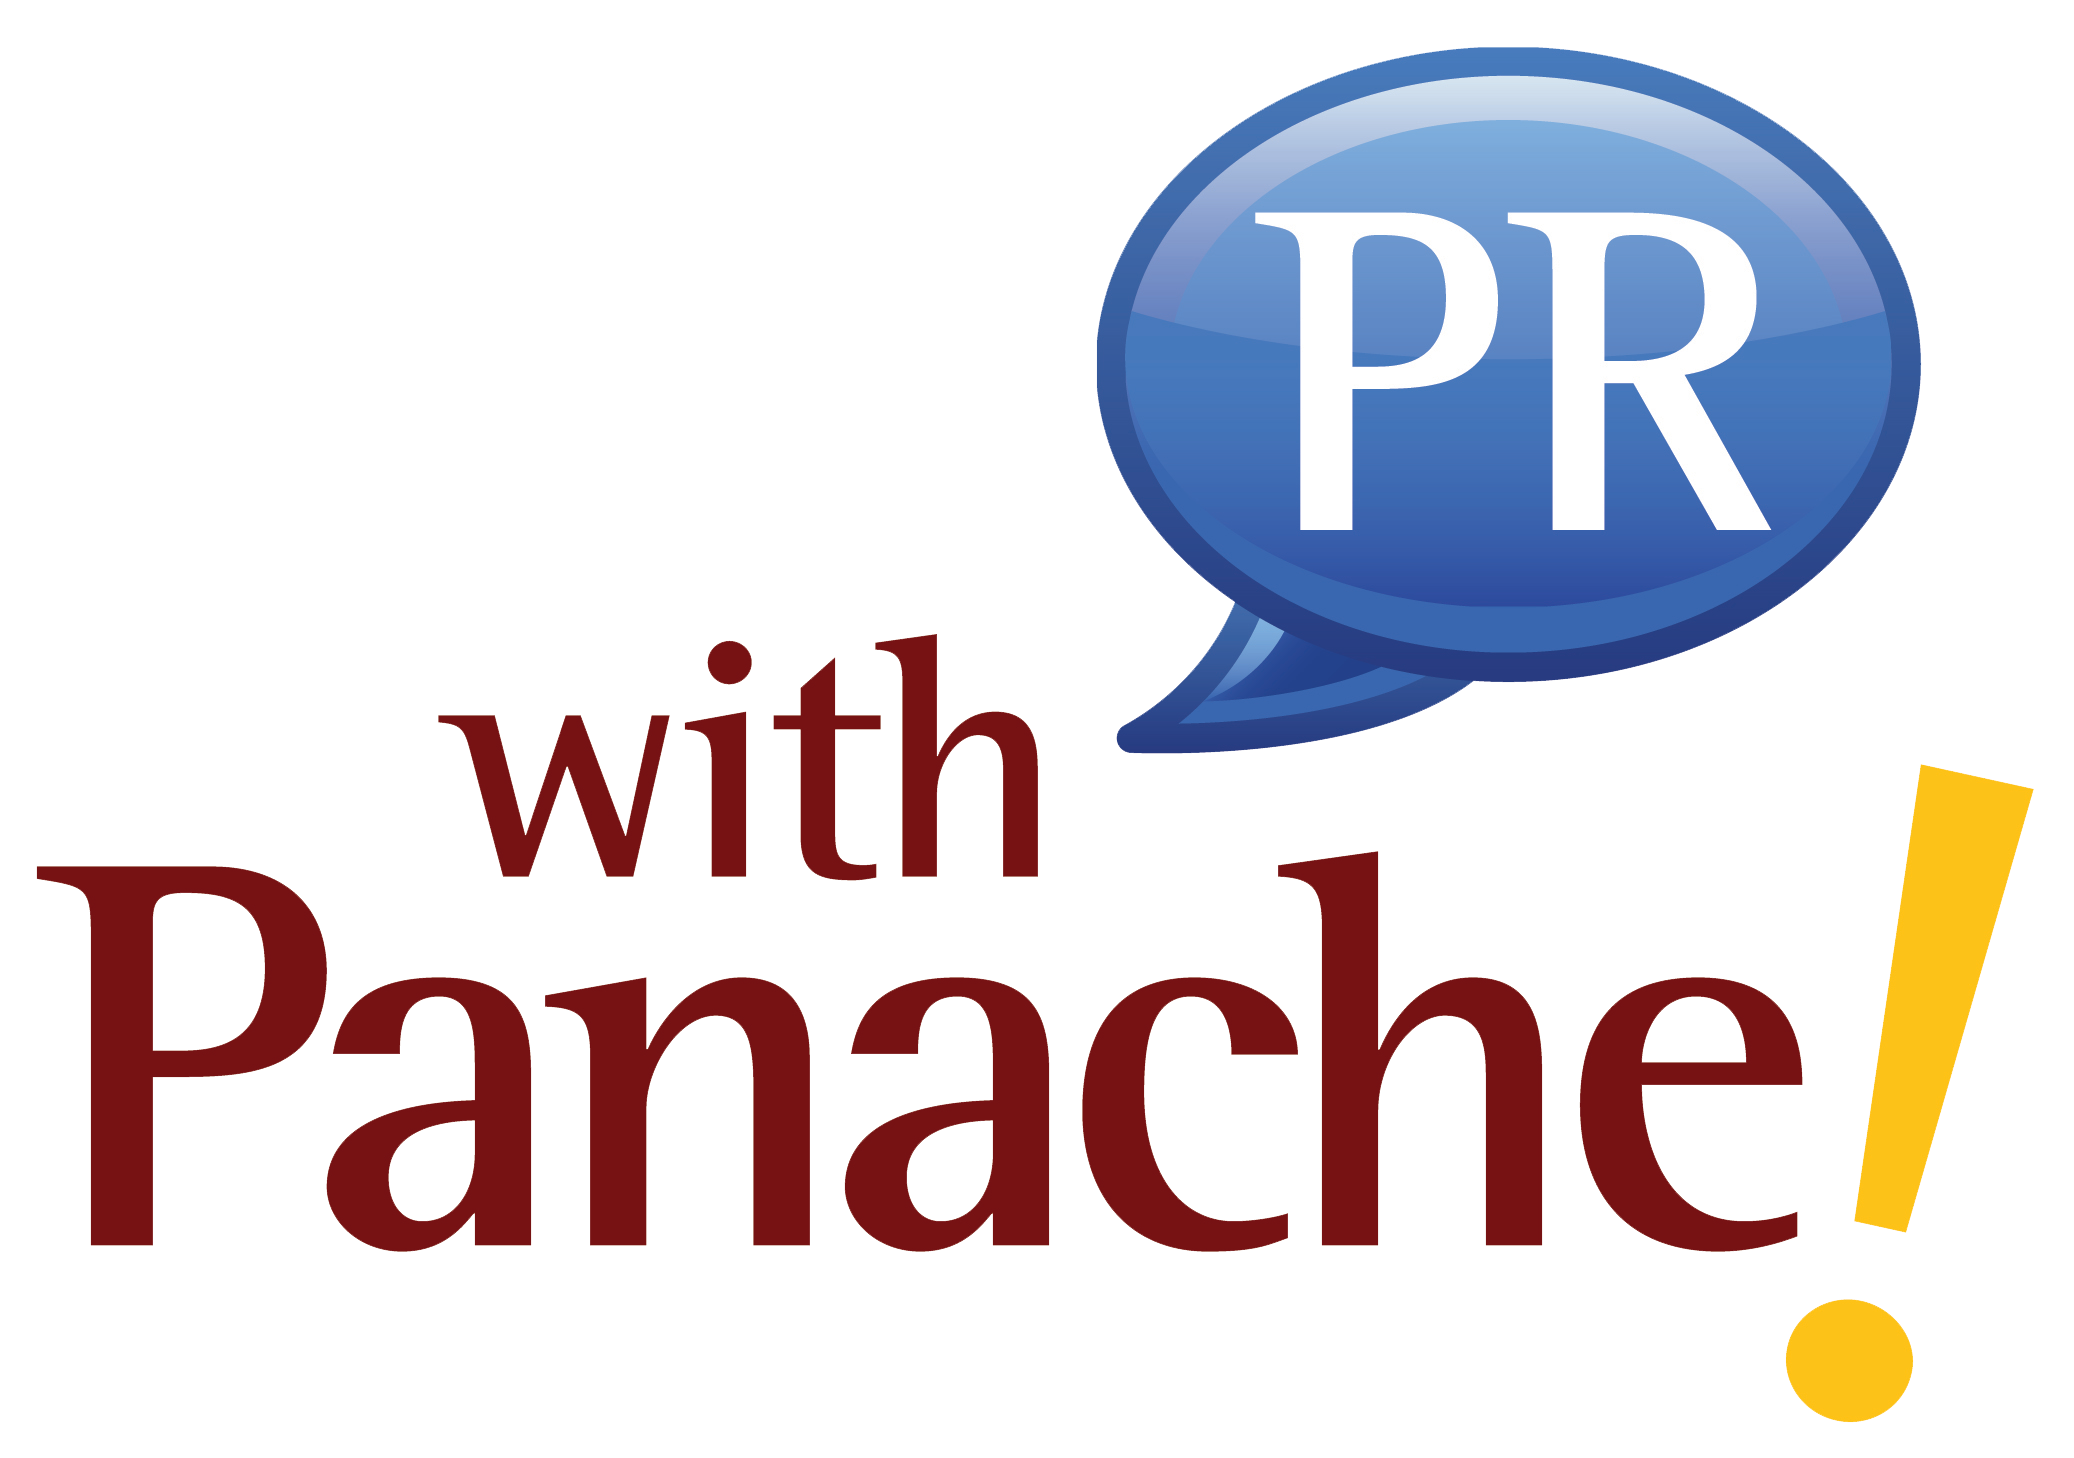 Students Share Their Ed Tech Insights in the PR with Panache! Storytelling Suite